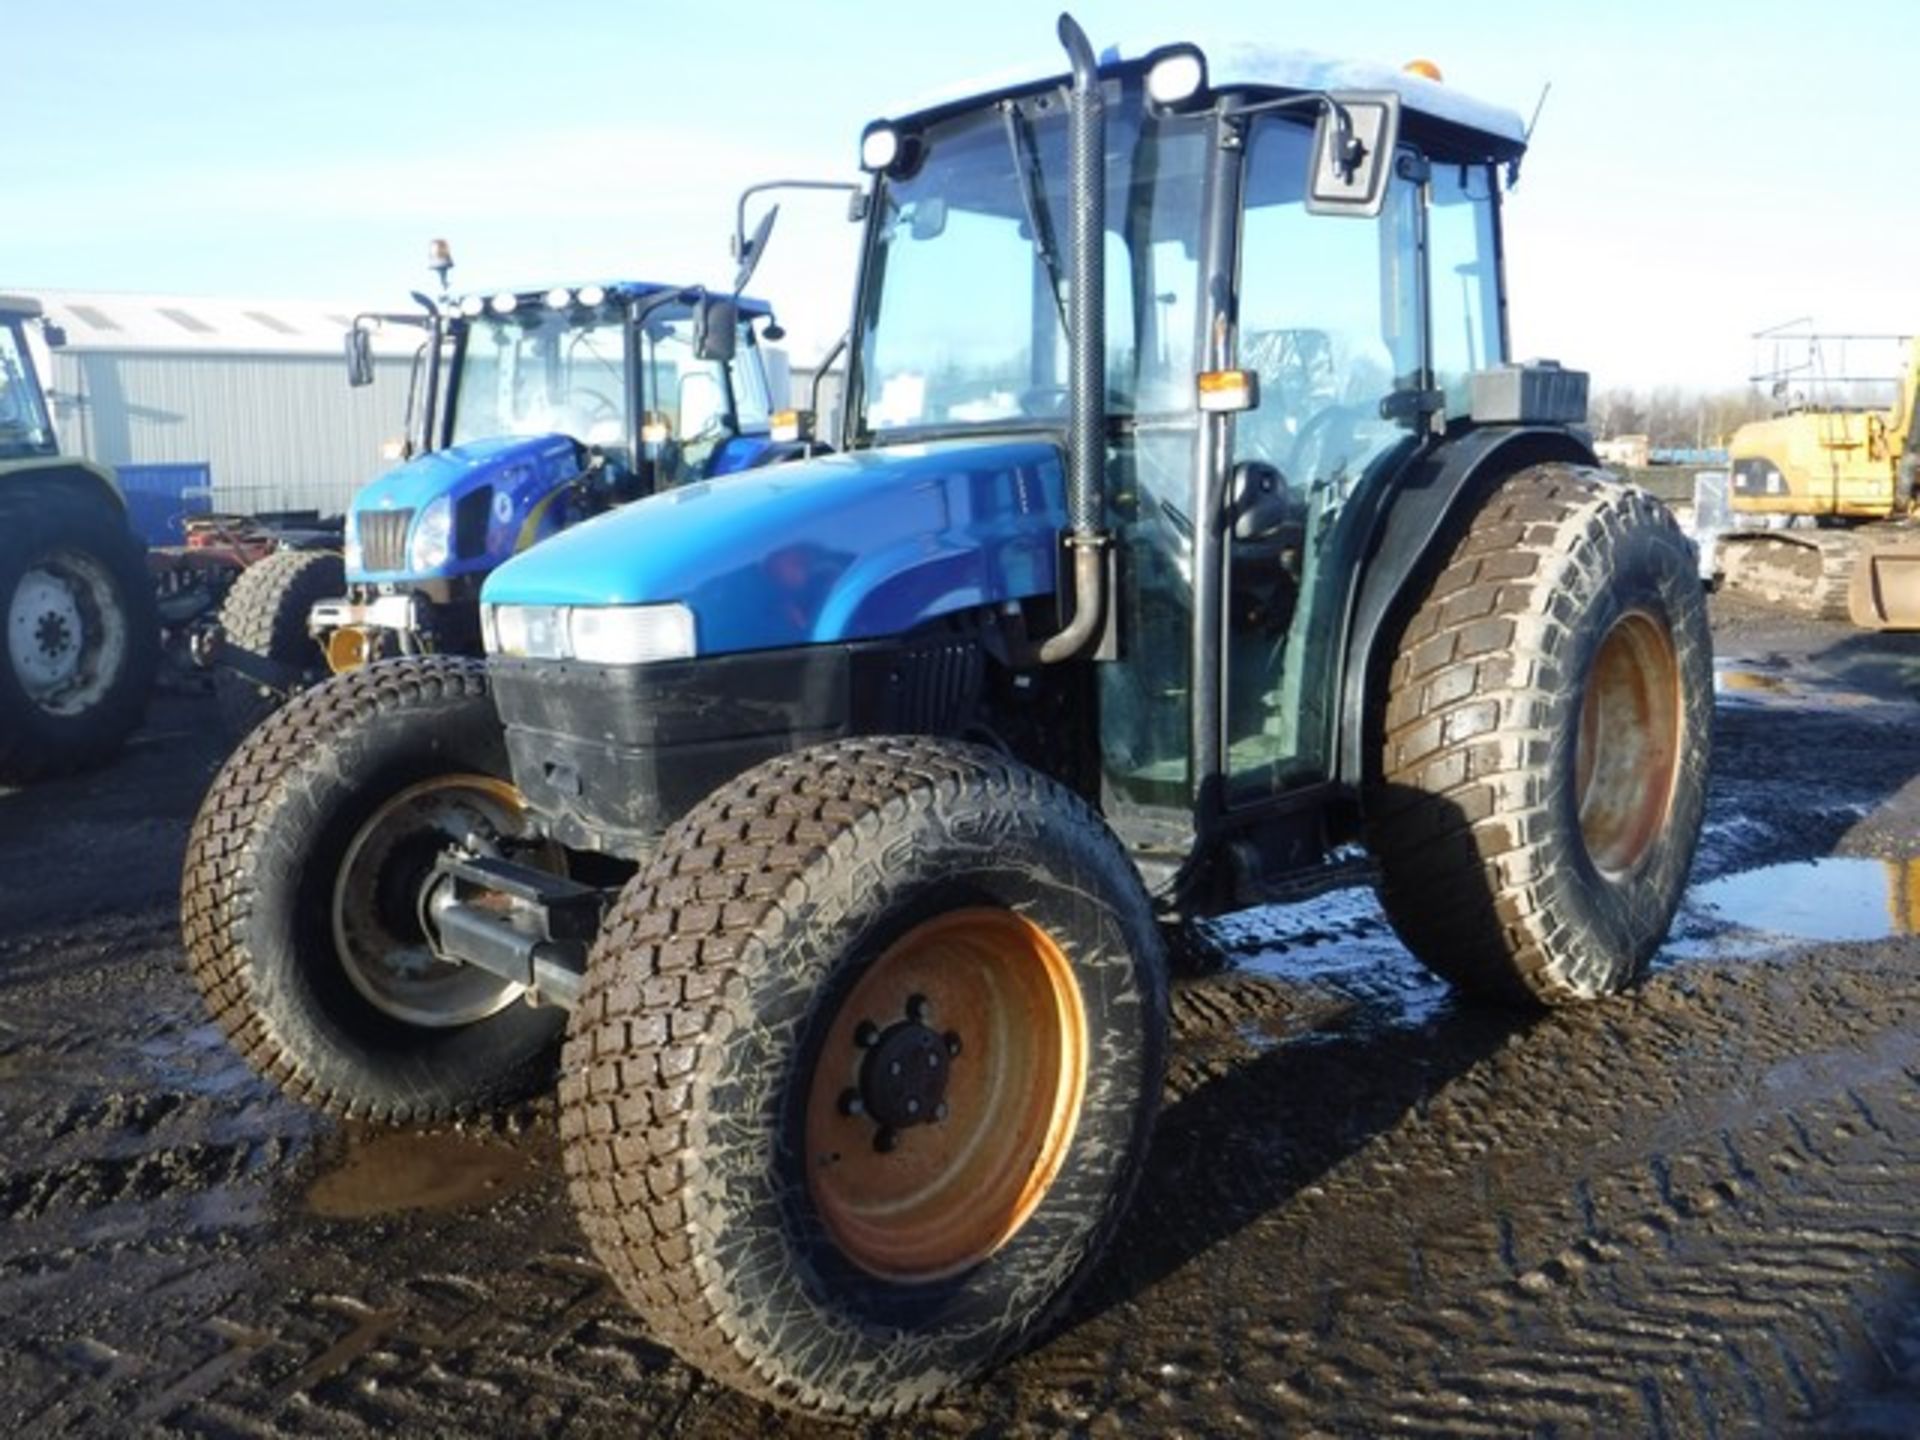 NEW HOLLAND TRACTOR C/W REAR PTO 1727HRS (CORRECT) REG - AW02AUT YEAR 2002 - Image 3 of 9